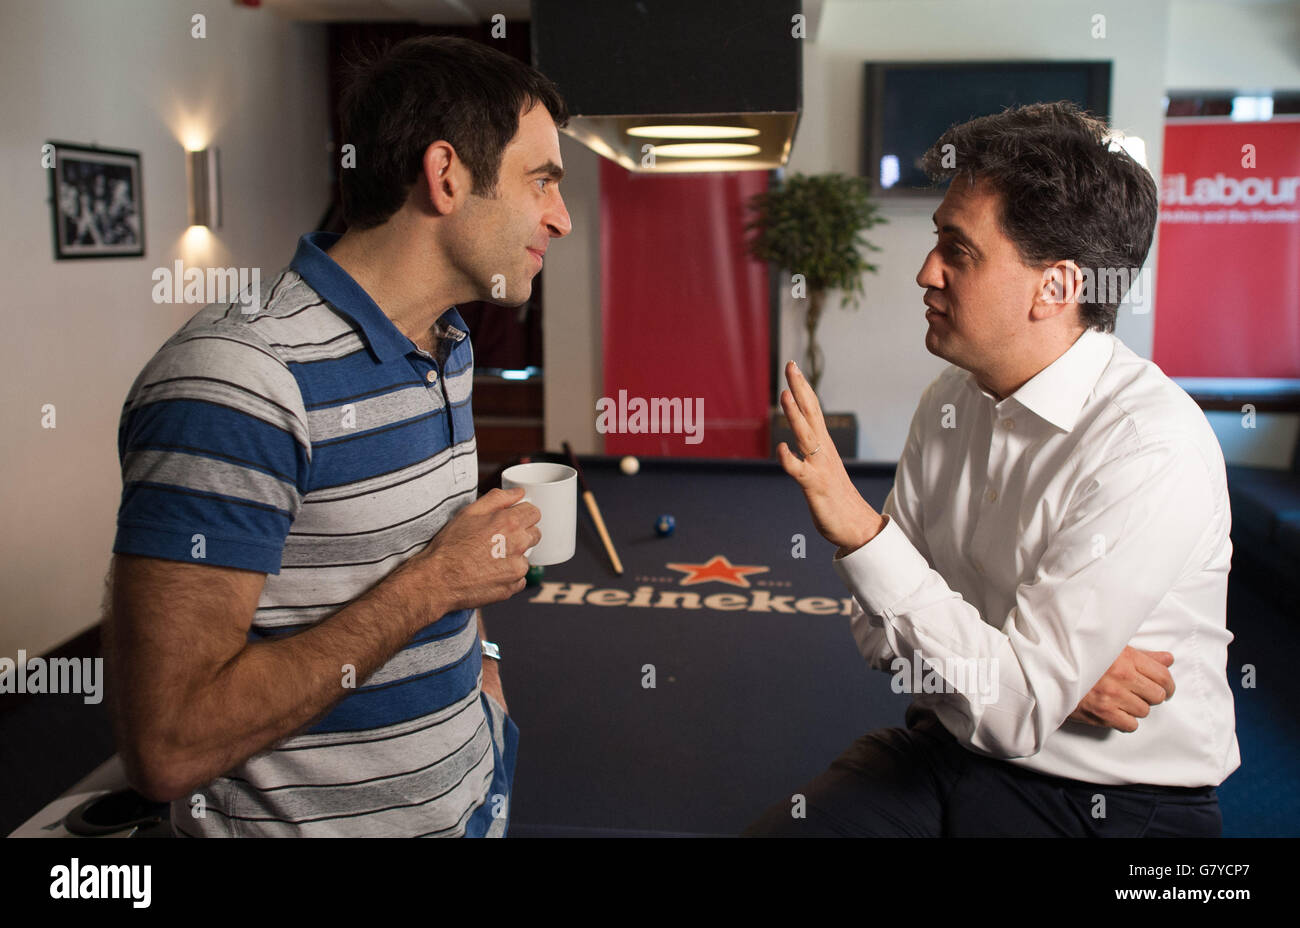 Previously unissued photo dated 23/04/15 of Labour leader Ed Miliband with Snooker player Ronnie O'Sullivan as they played pool at the Common Room Pool hall in Sheffield. Stock Photo